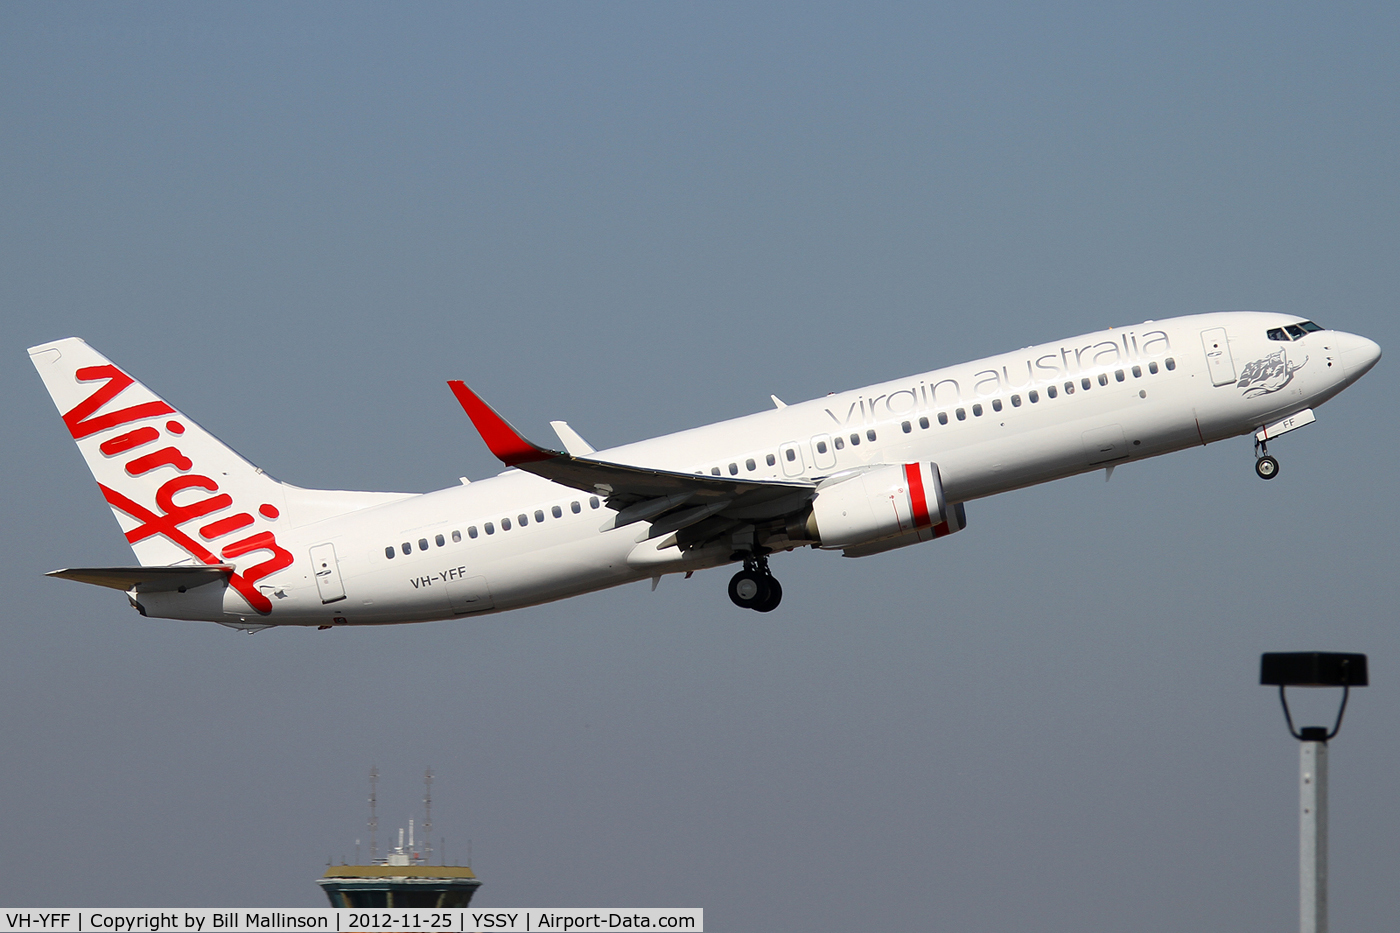 VH-YFF, 2011 Boeing 737-8FE C/N 40994, up and away from 34L